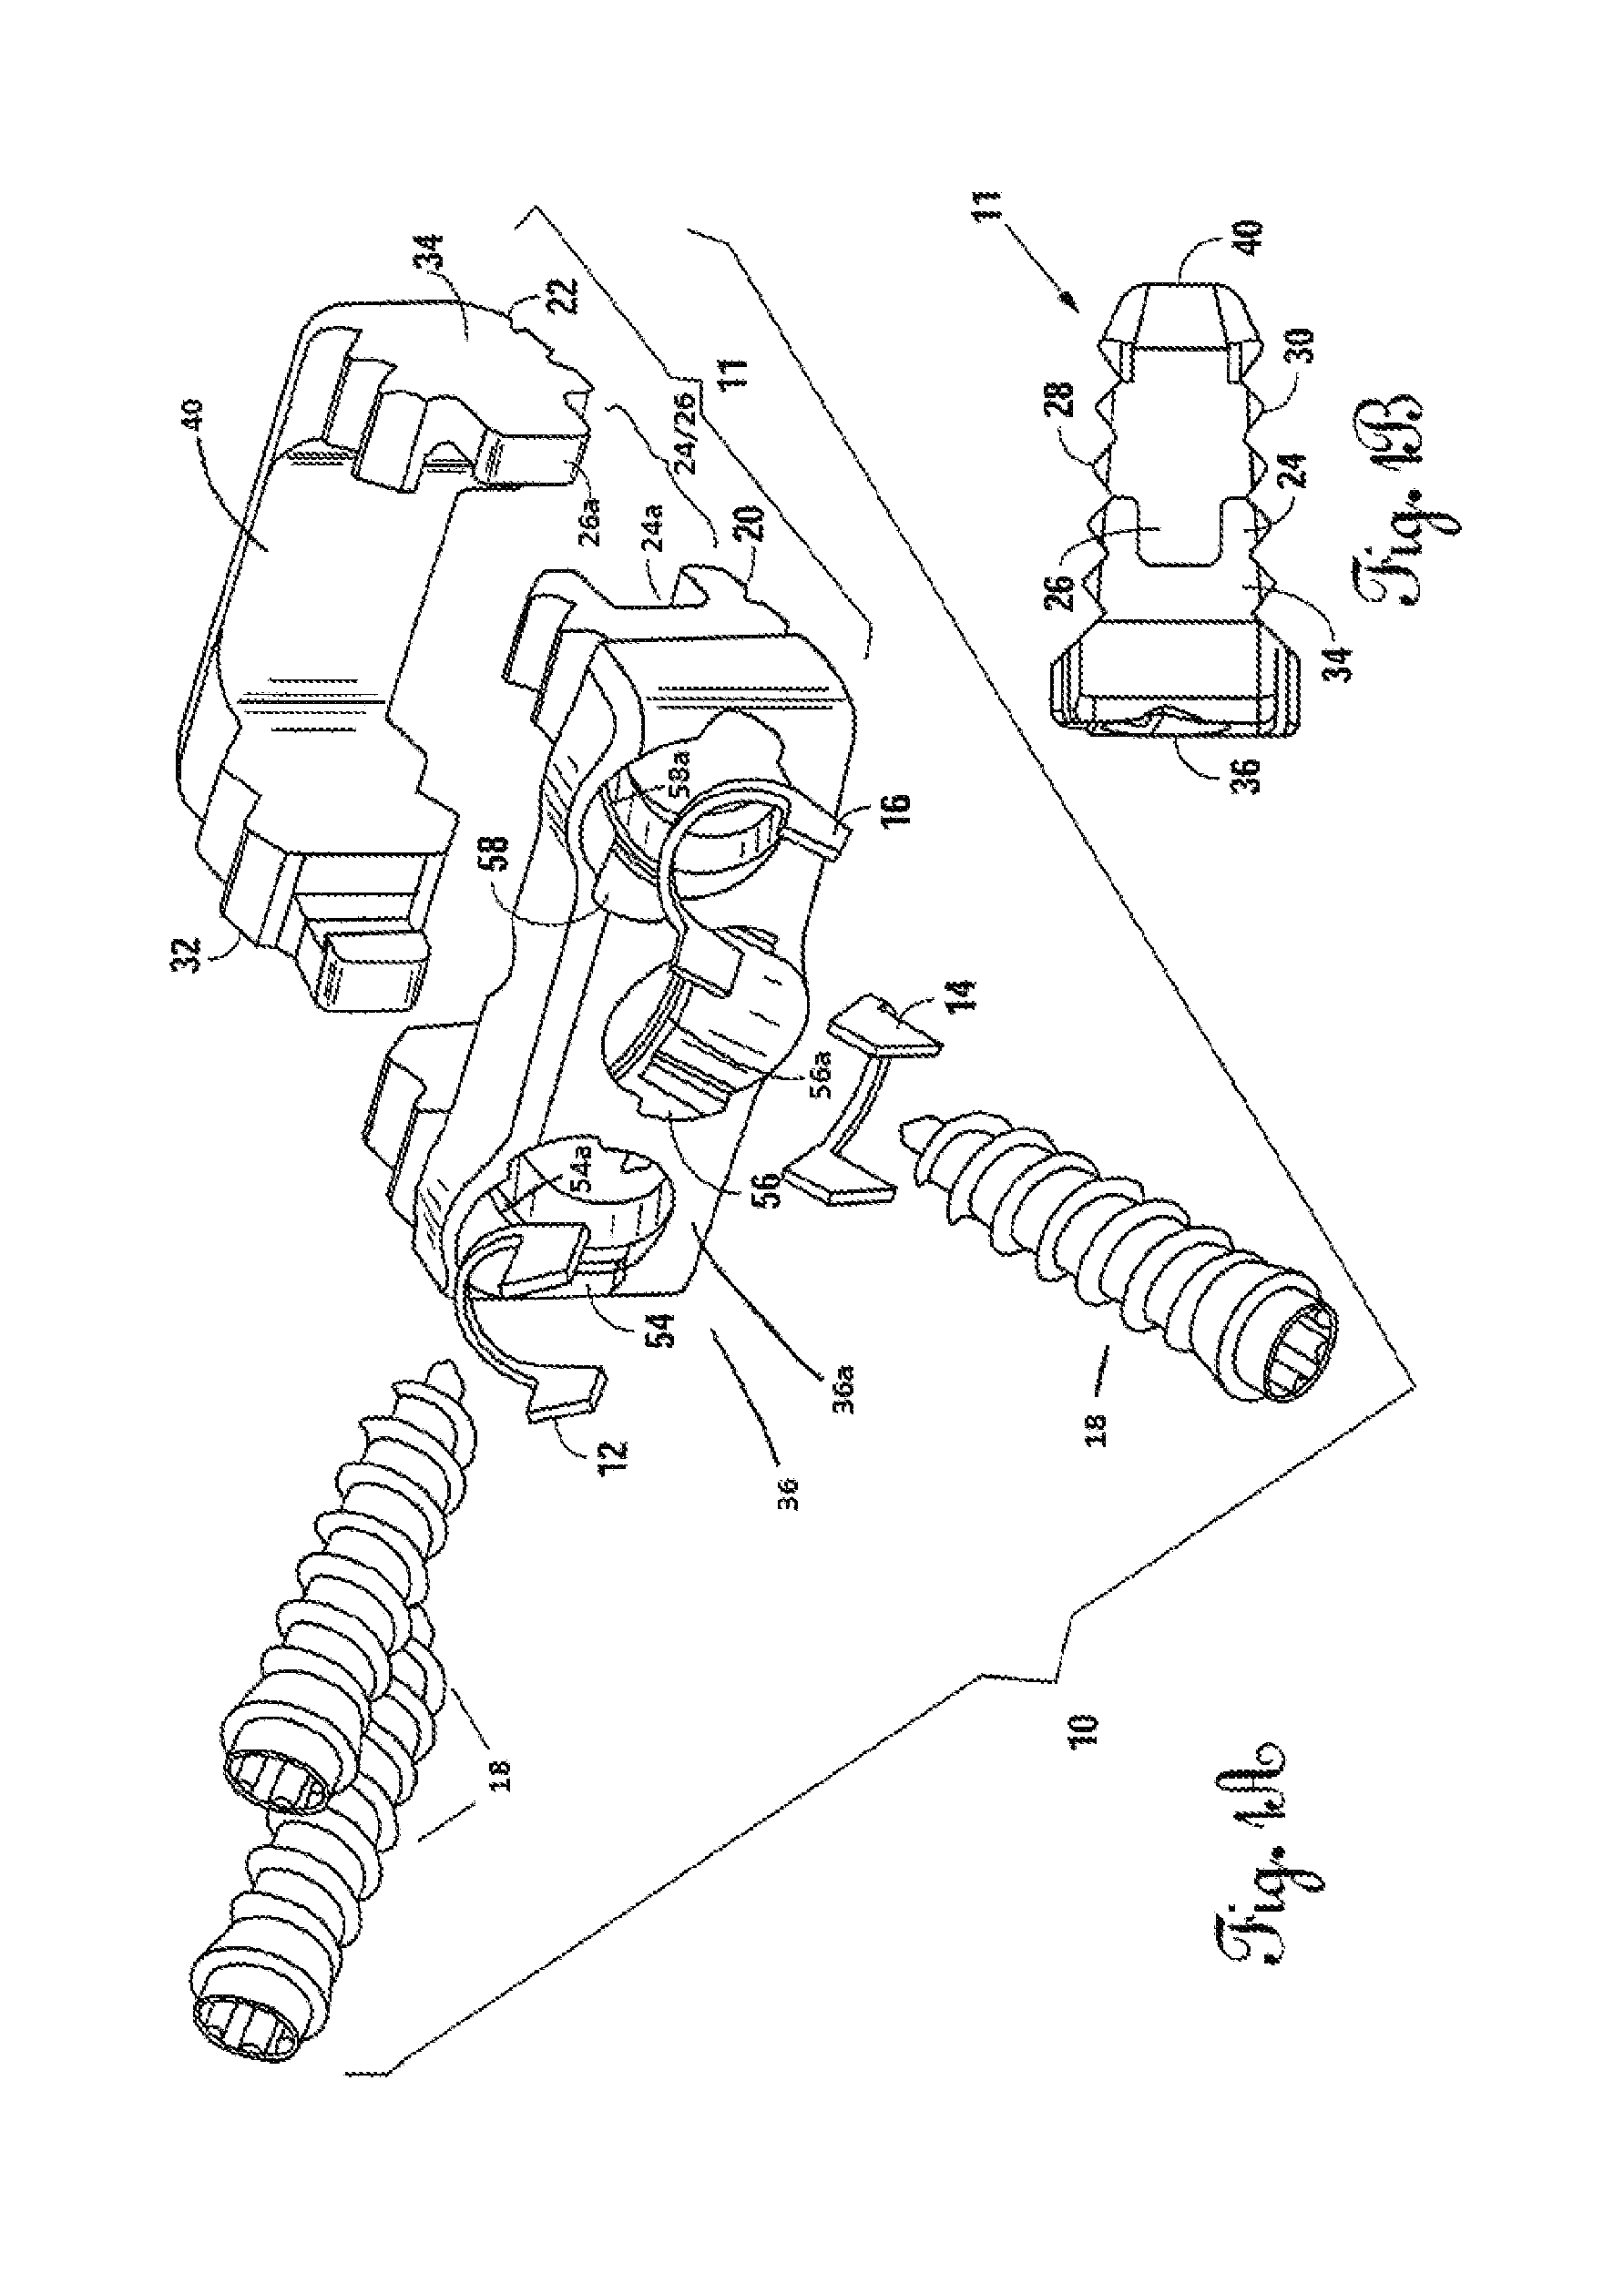 Low profile standalone cervical interbody with screw locking clips and method of using same